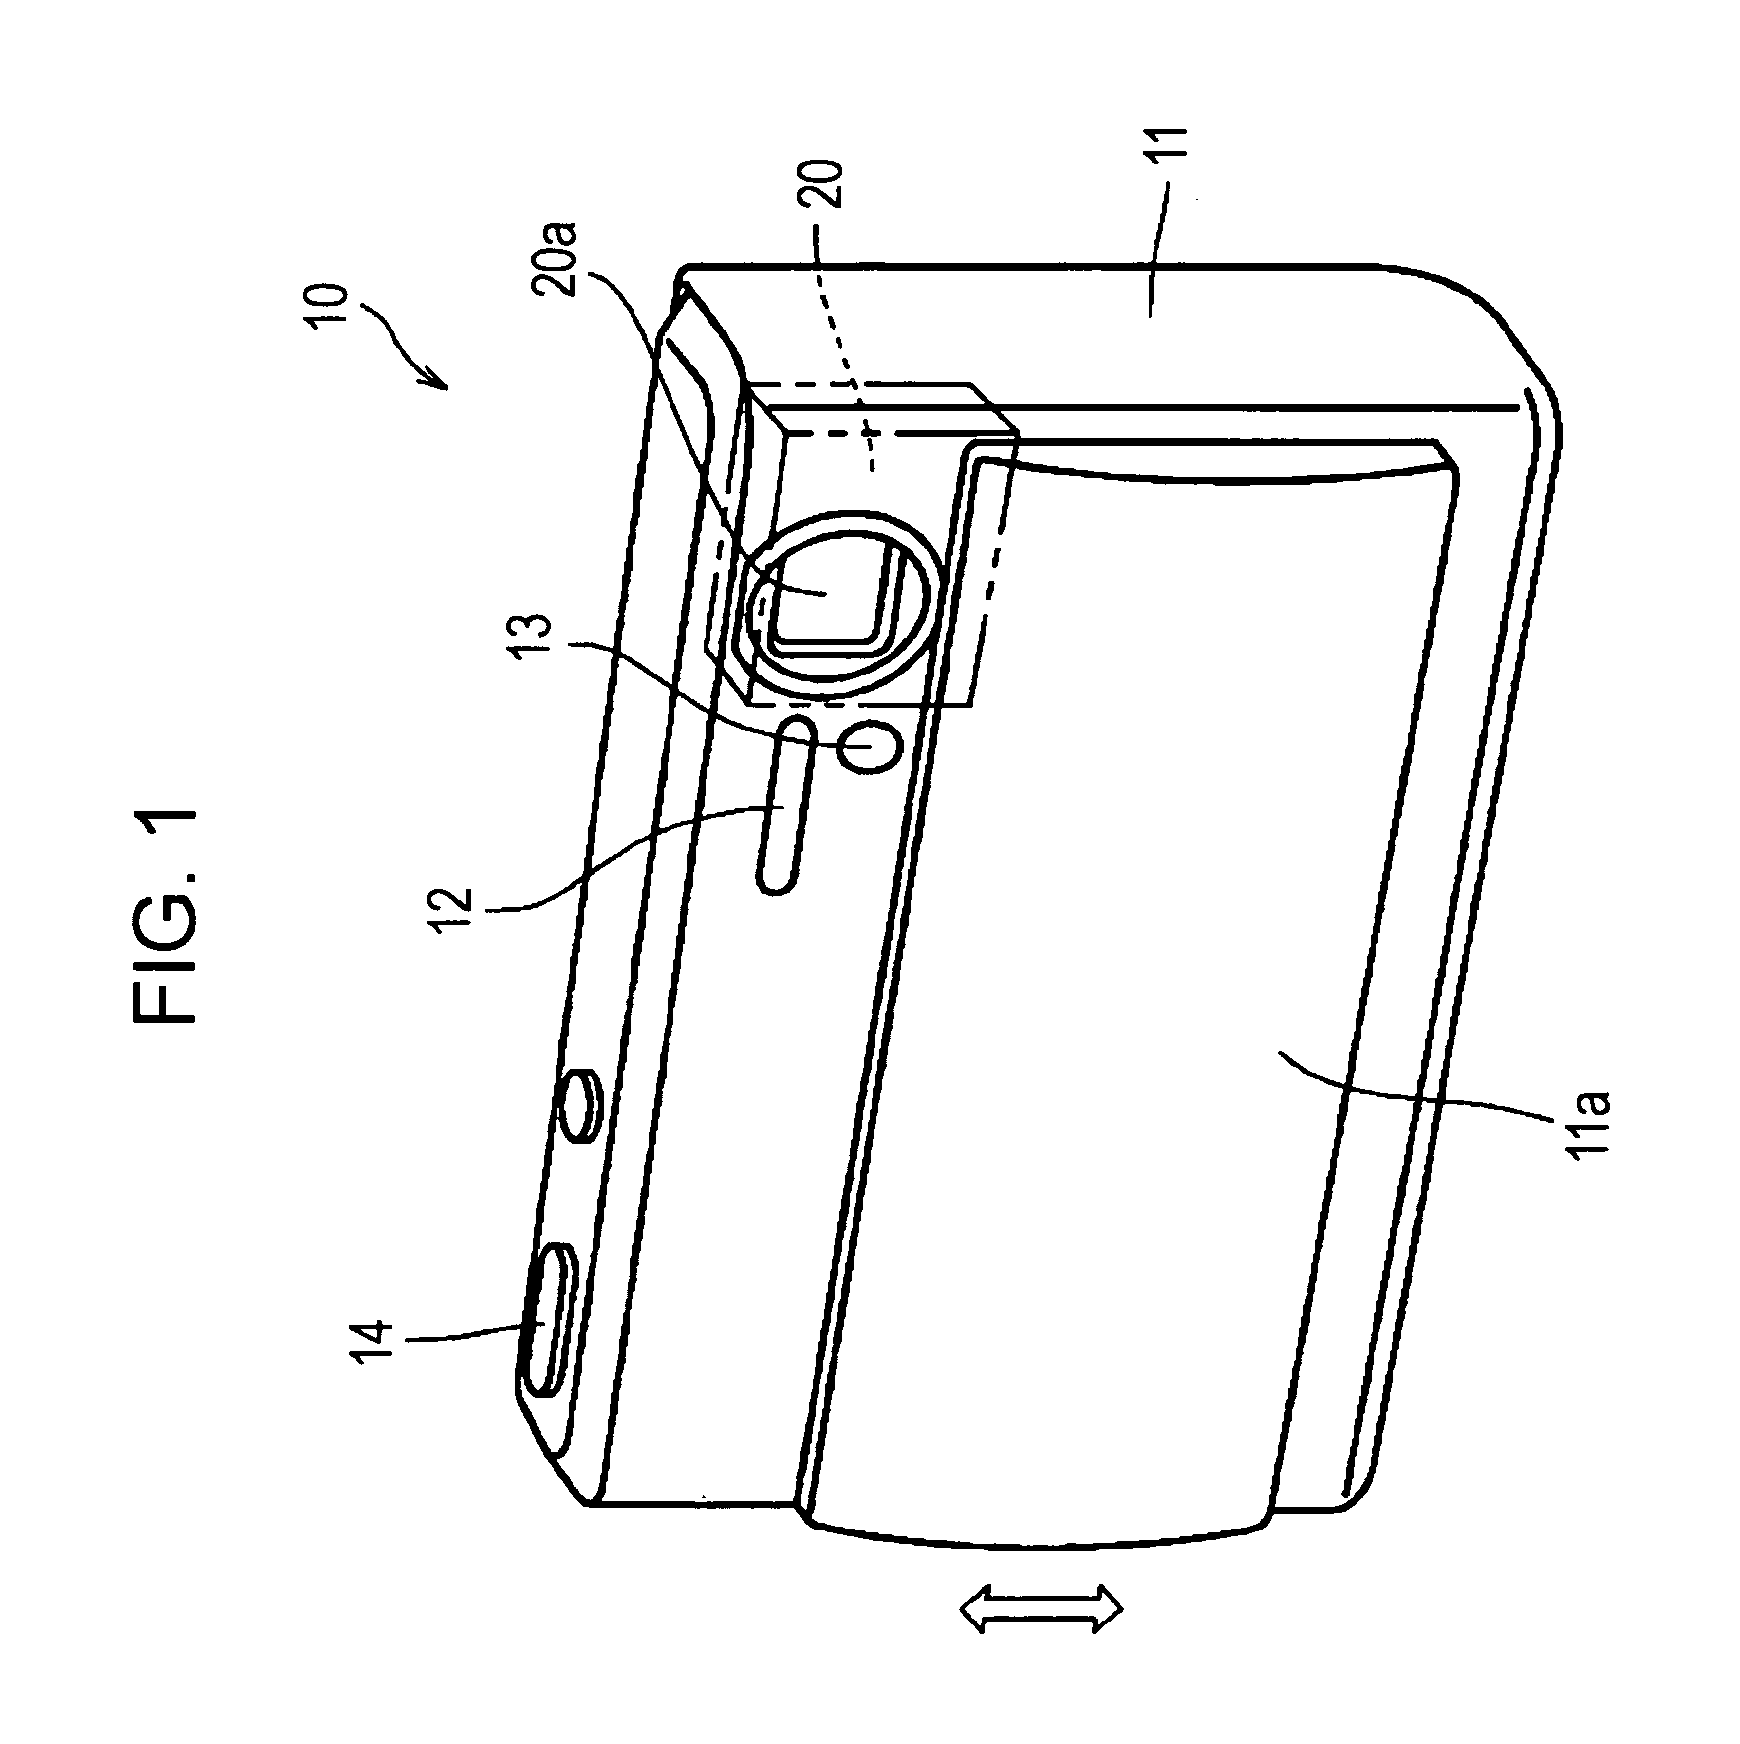 Optical Element driving device, optical element barrel, and image pickup apparatus